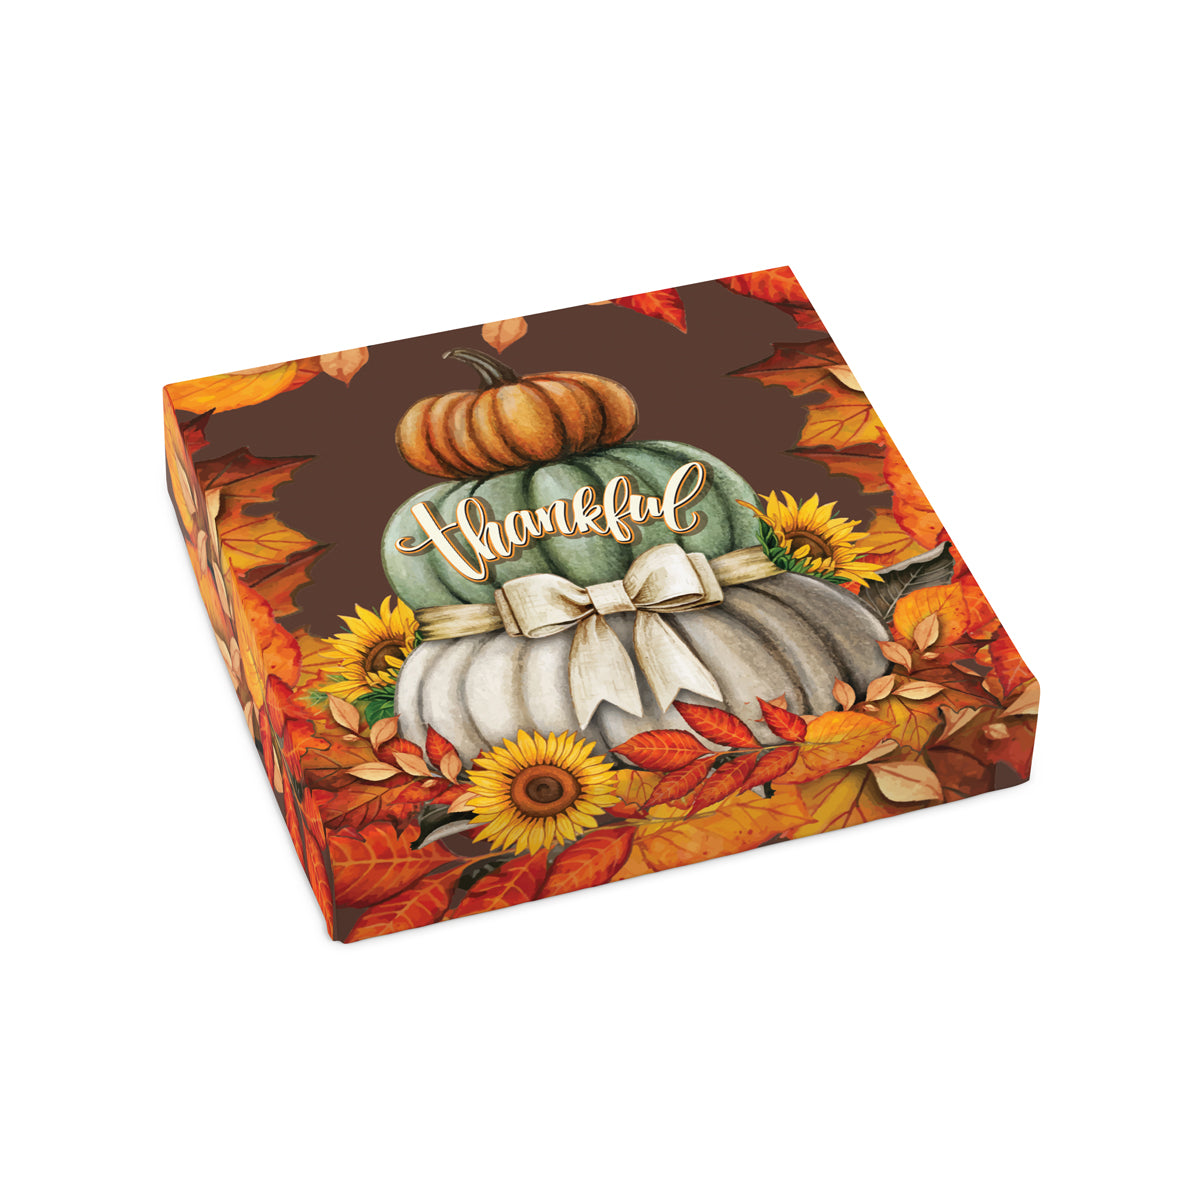 16 piece assortment top with 'Thankful' and pumpkins stacked, surrounded by leaves 